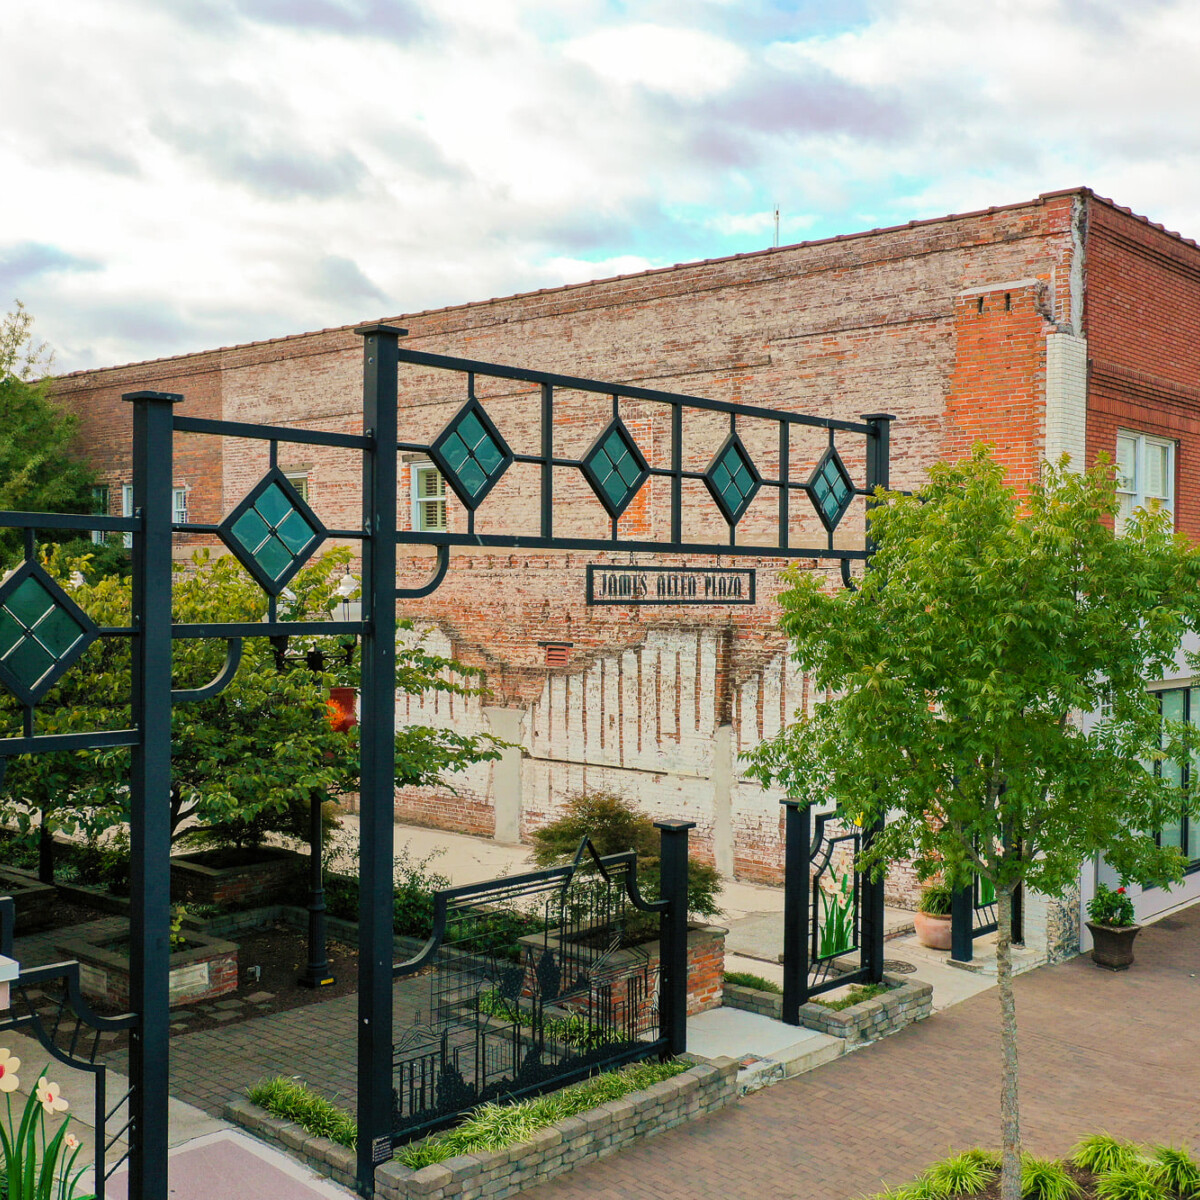 Two historic brick buildings flank the entrance to an outdoor plaza with a square, metal and stained glass gateway.